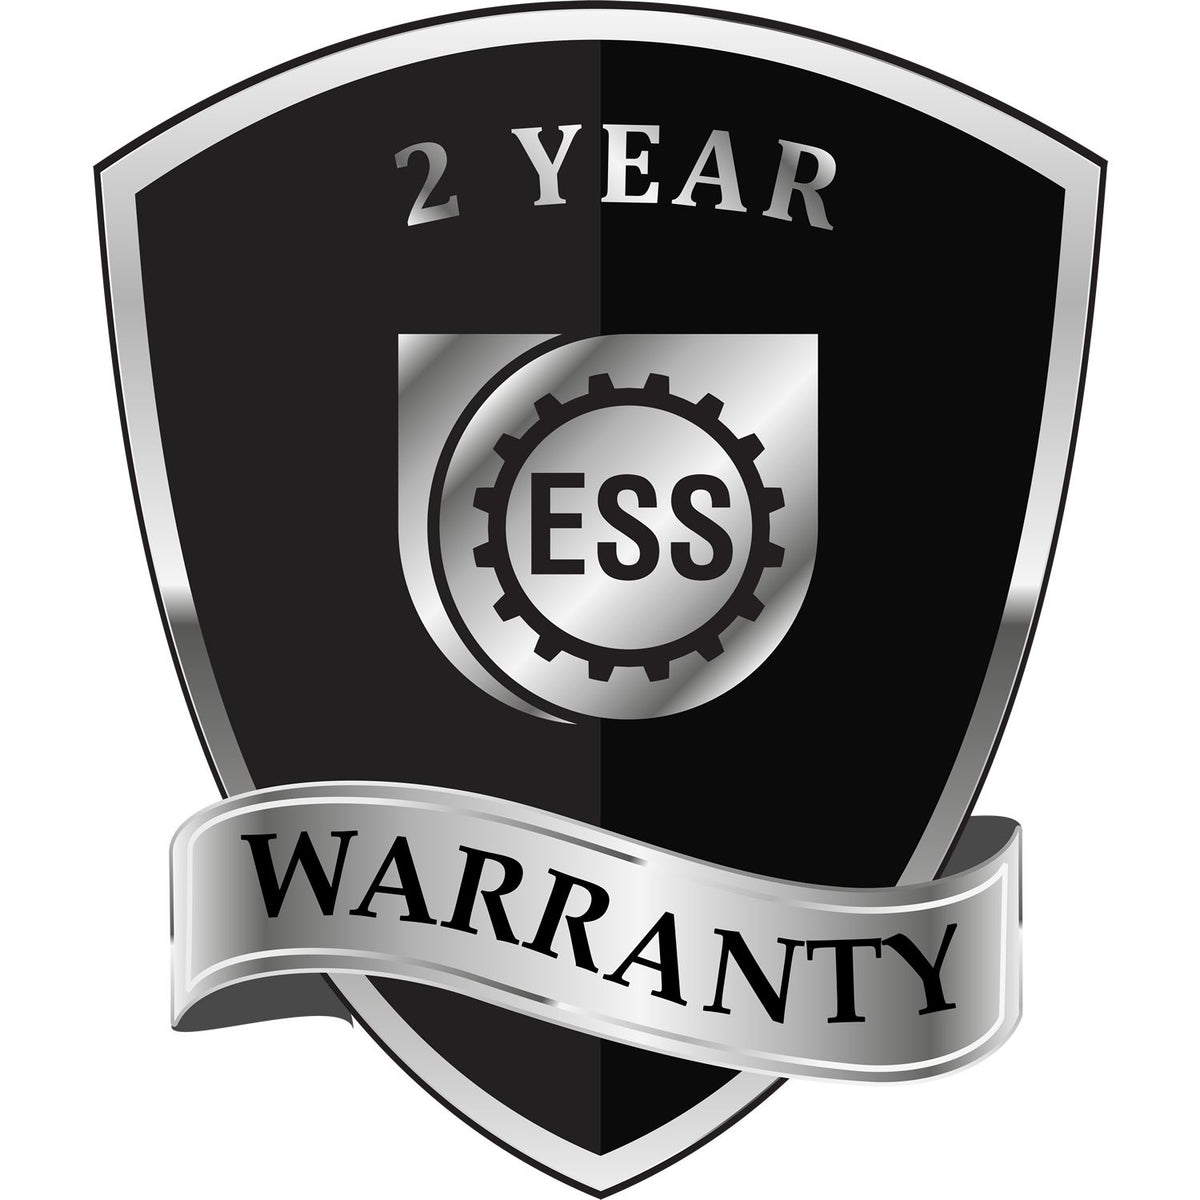 A black and silver badge or emblem showing warranty information for the Hybrid New Mexico Geologist Seal